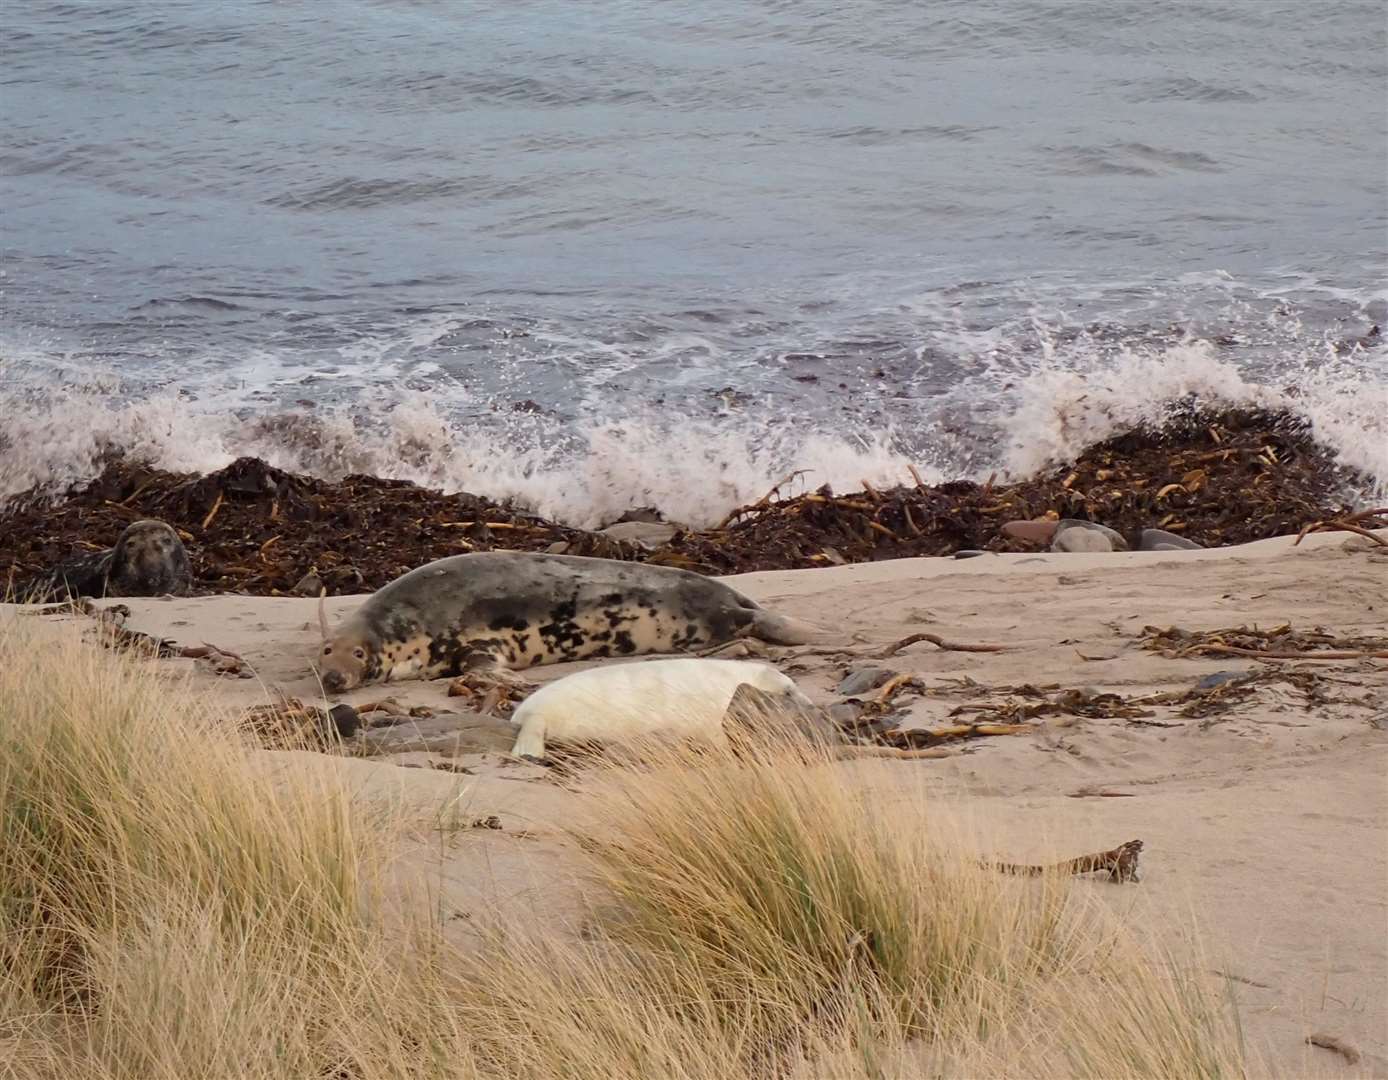 A seal and her pup on the beach.